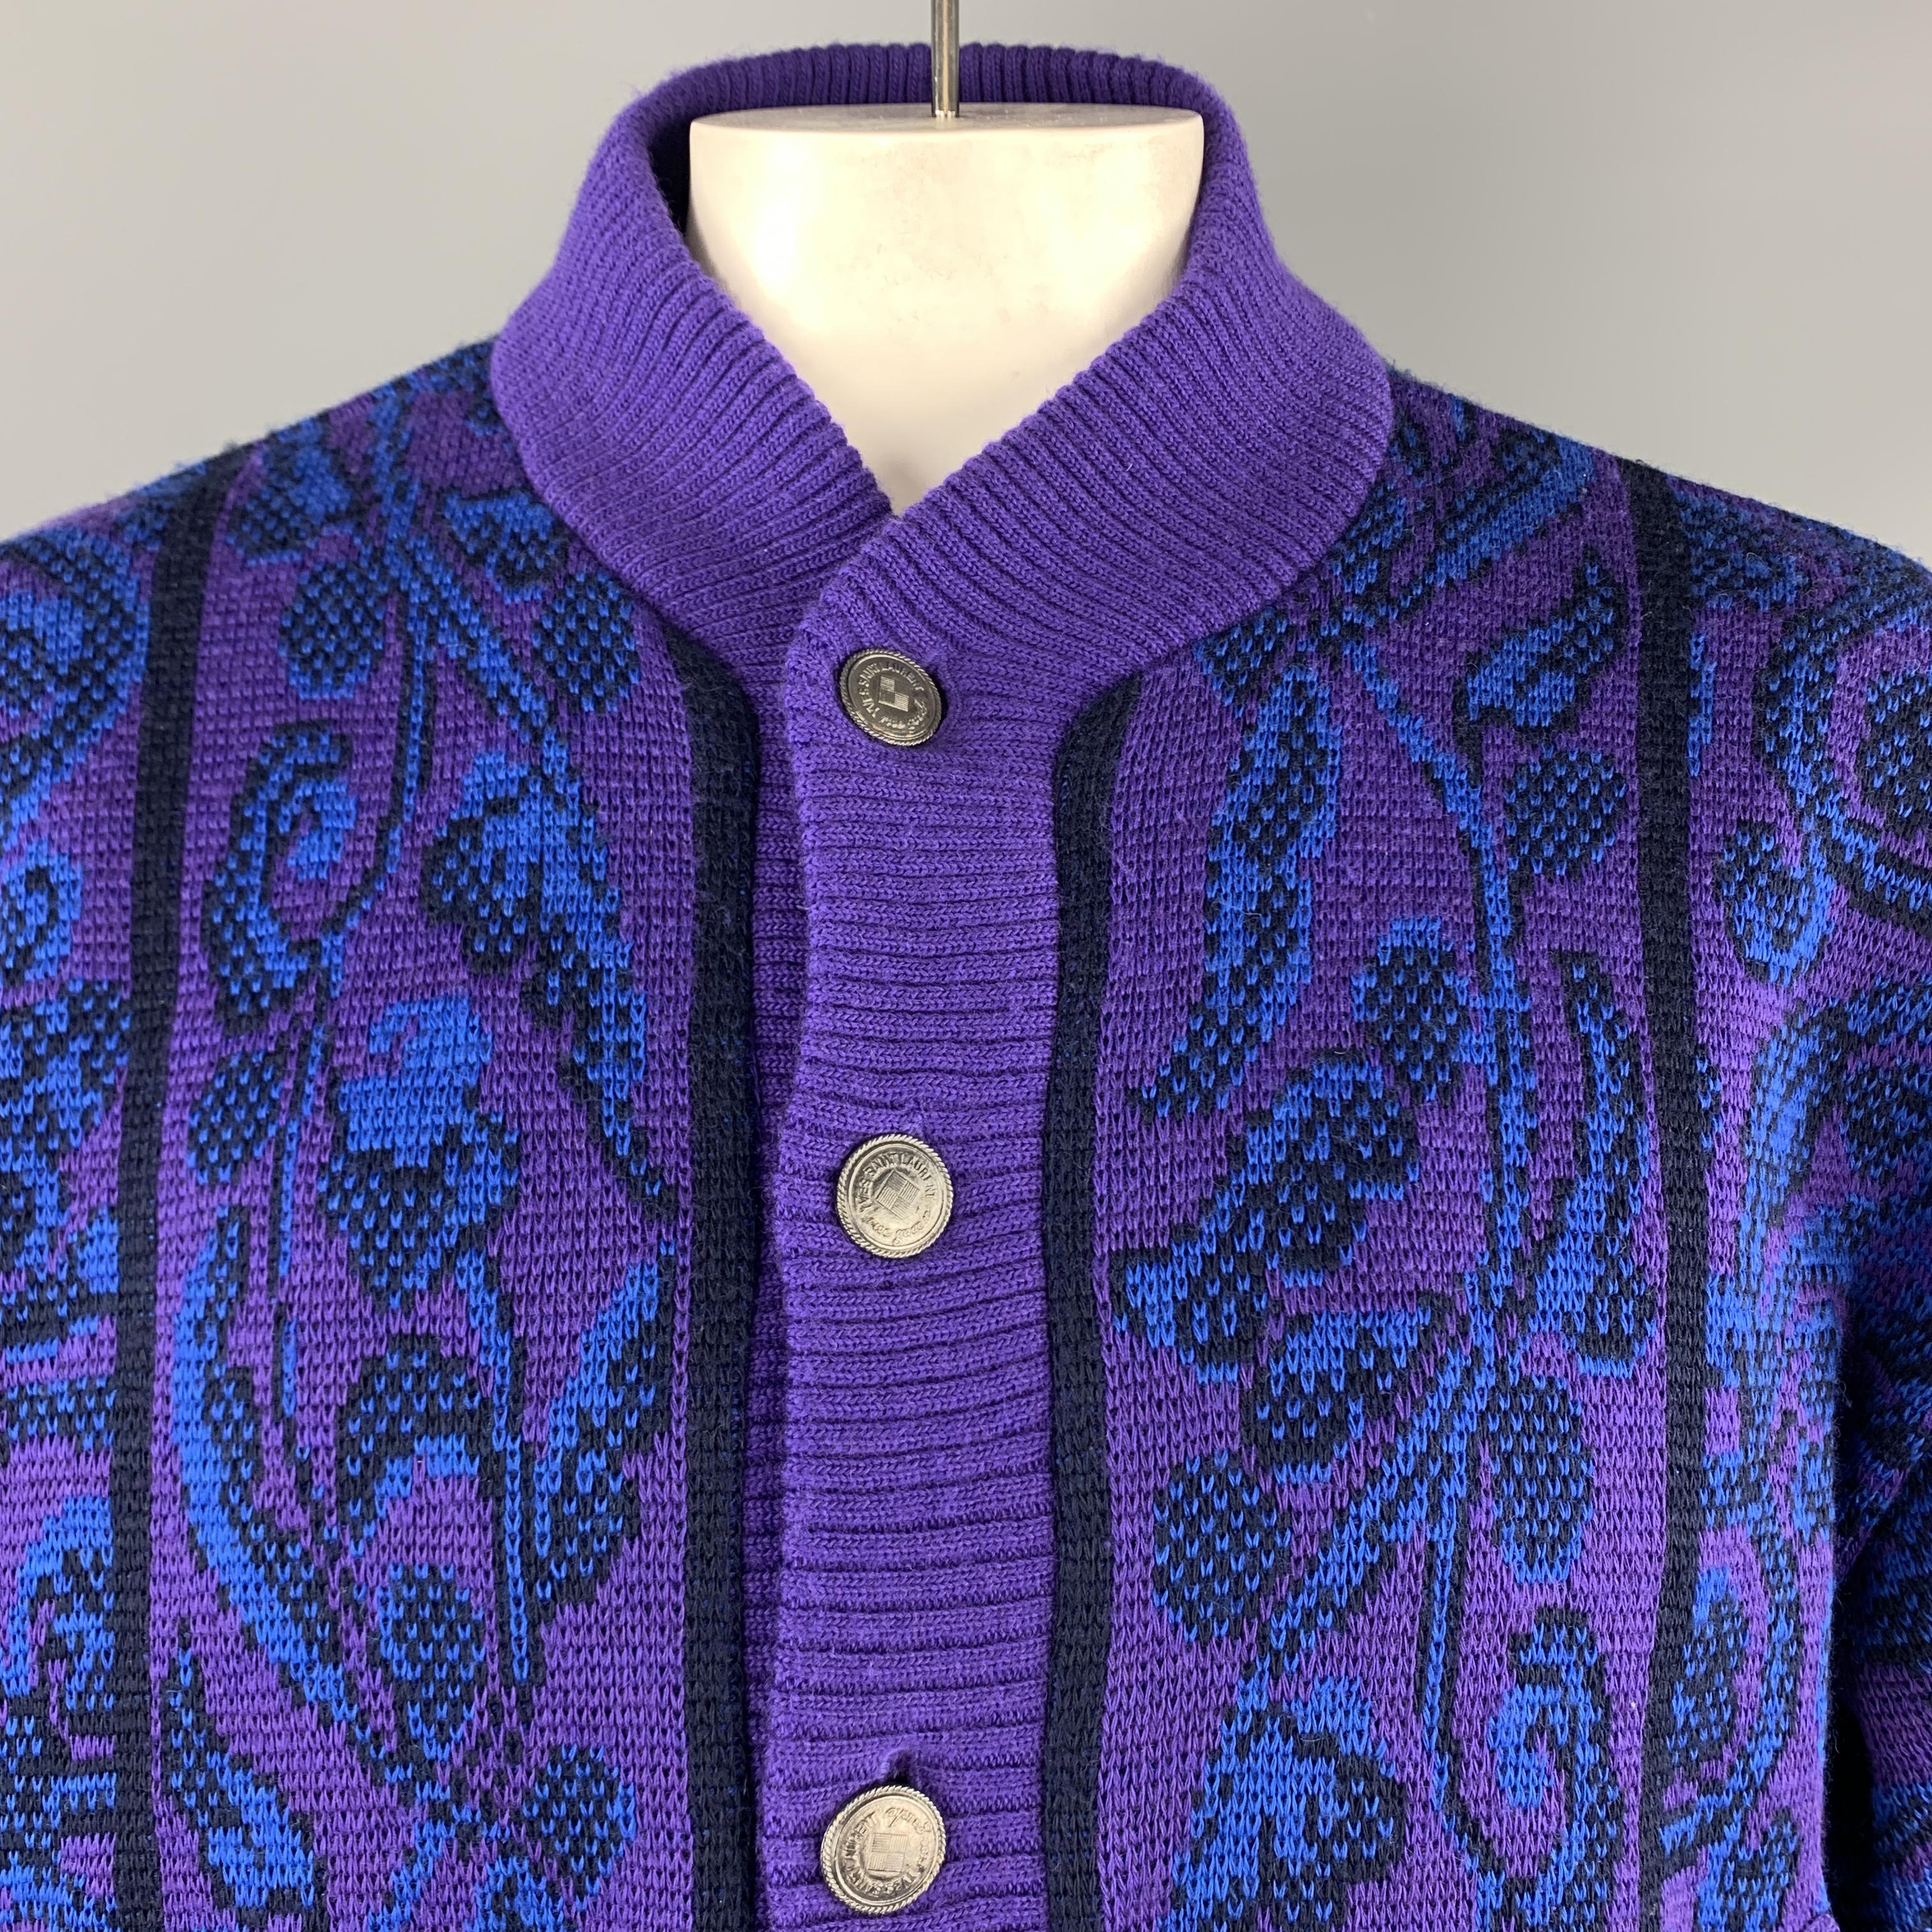 Vintage YVES SAINT LAURENT RIVE GAUCHE cardigan jacket comes in a vibrant purple and blue baroque print wool knit with silver tone embossed button front and quilted liner. Made in France.

Very Good Pre-Owned Condition.
Marked: IT